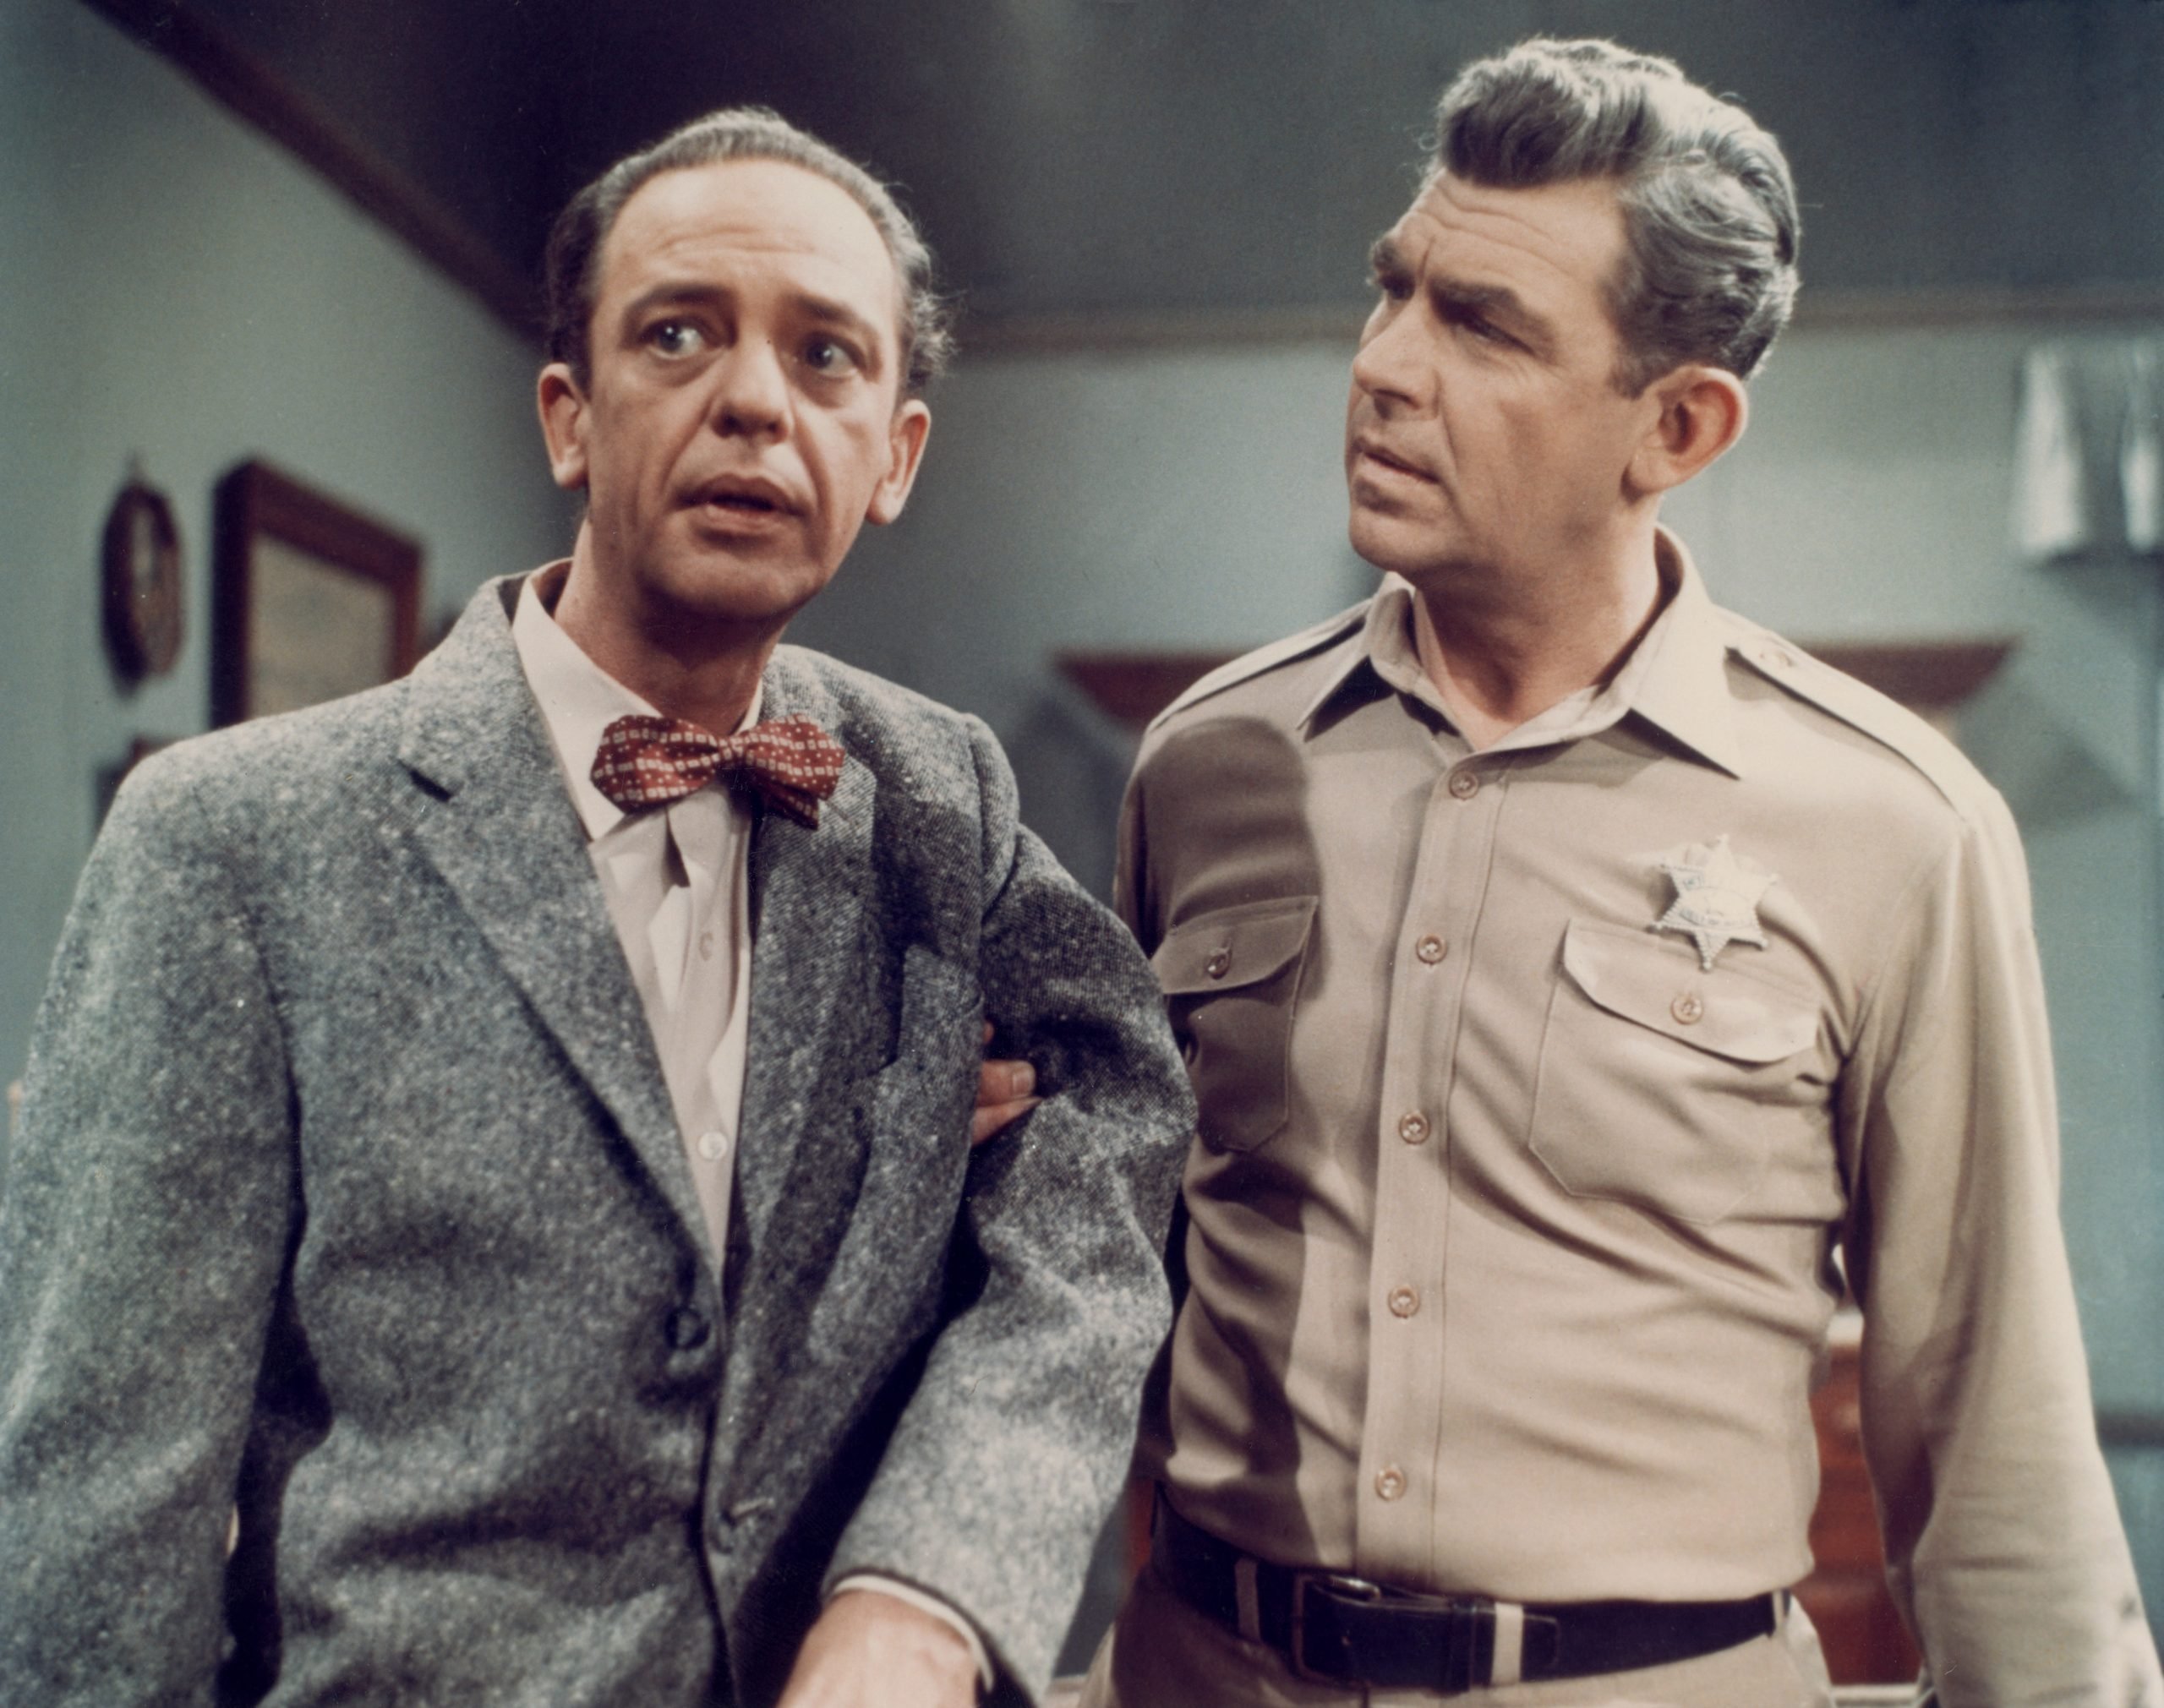 ‘Matlock’ Reunion Don Knotts Was Andy Griffith’s ‘Happiest Days’